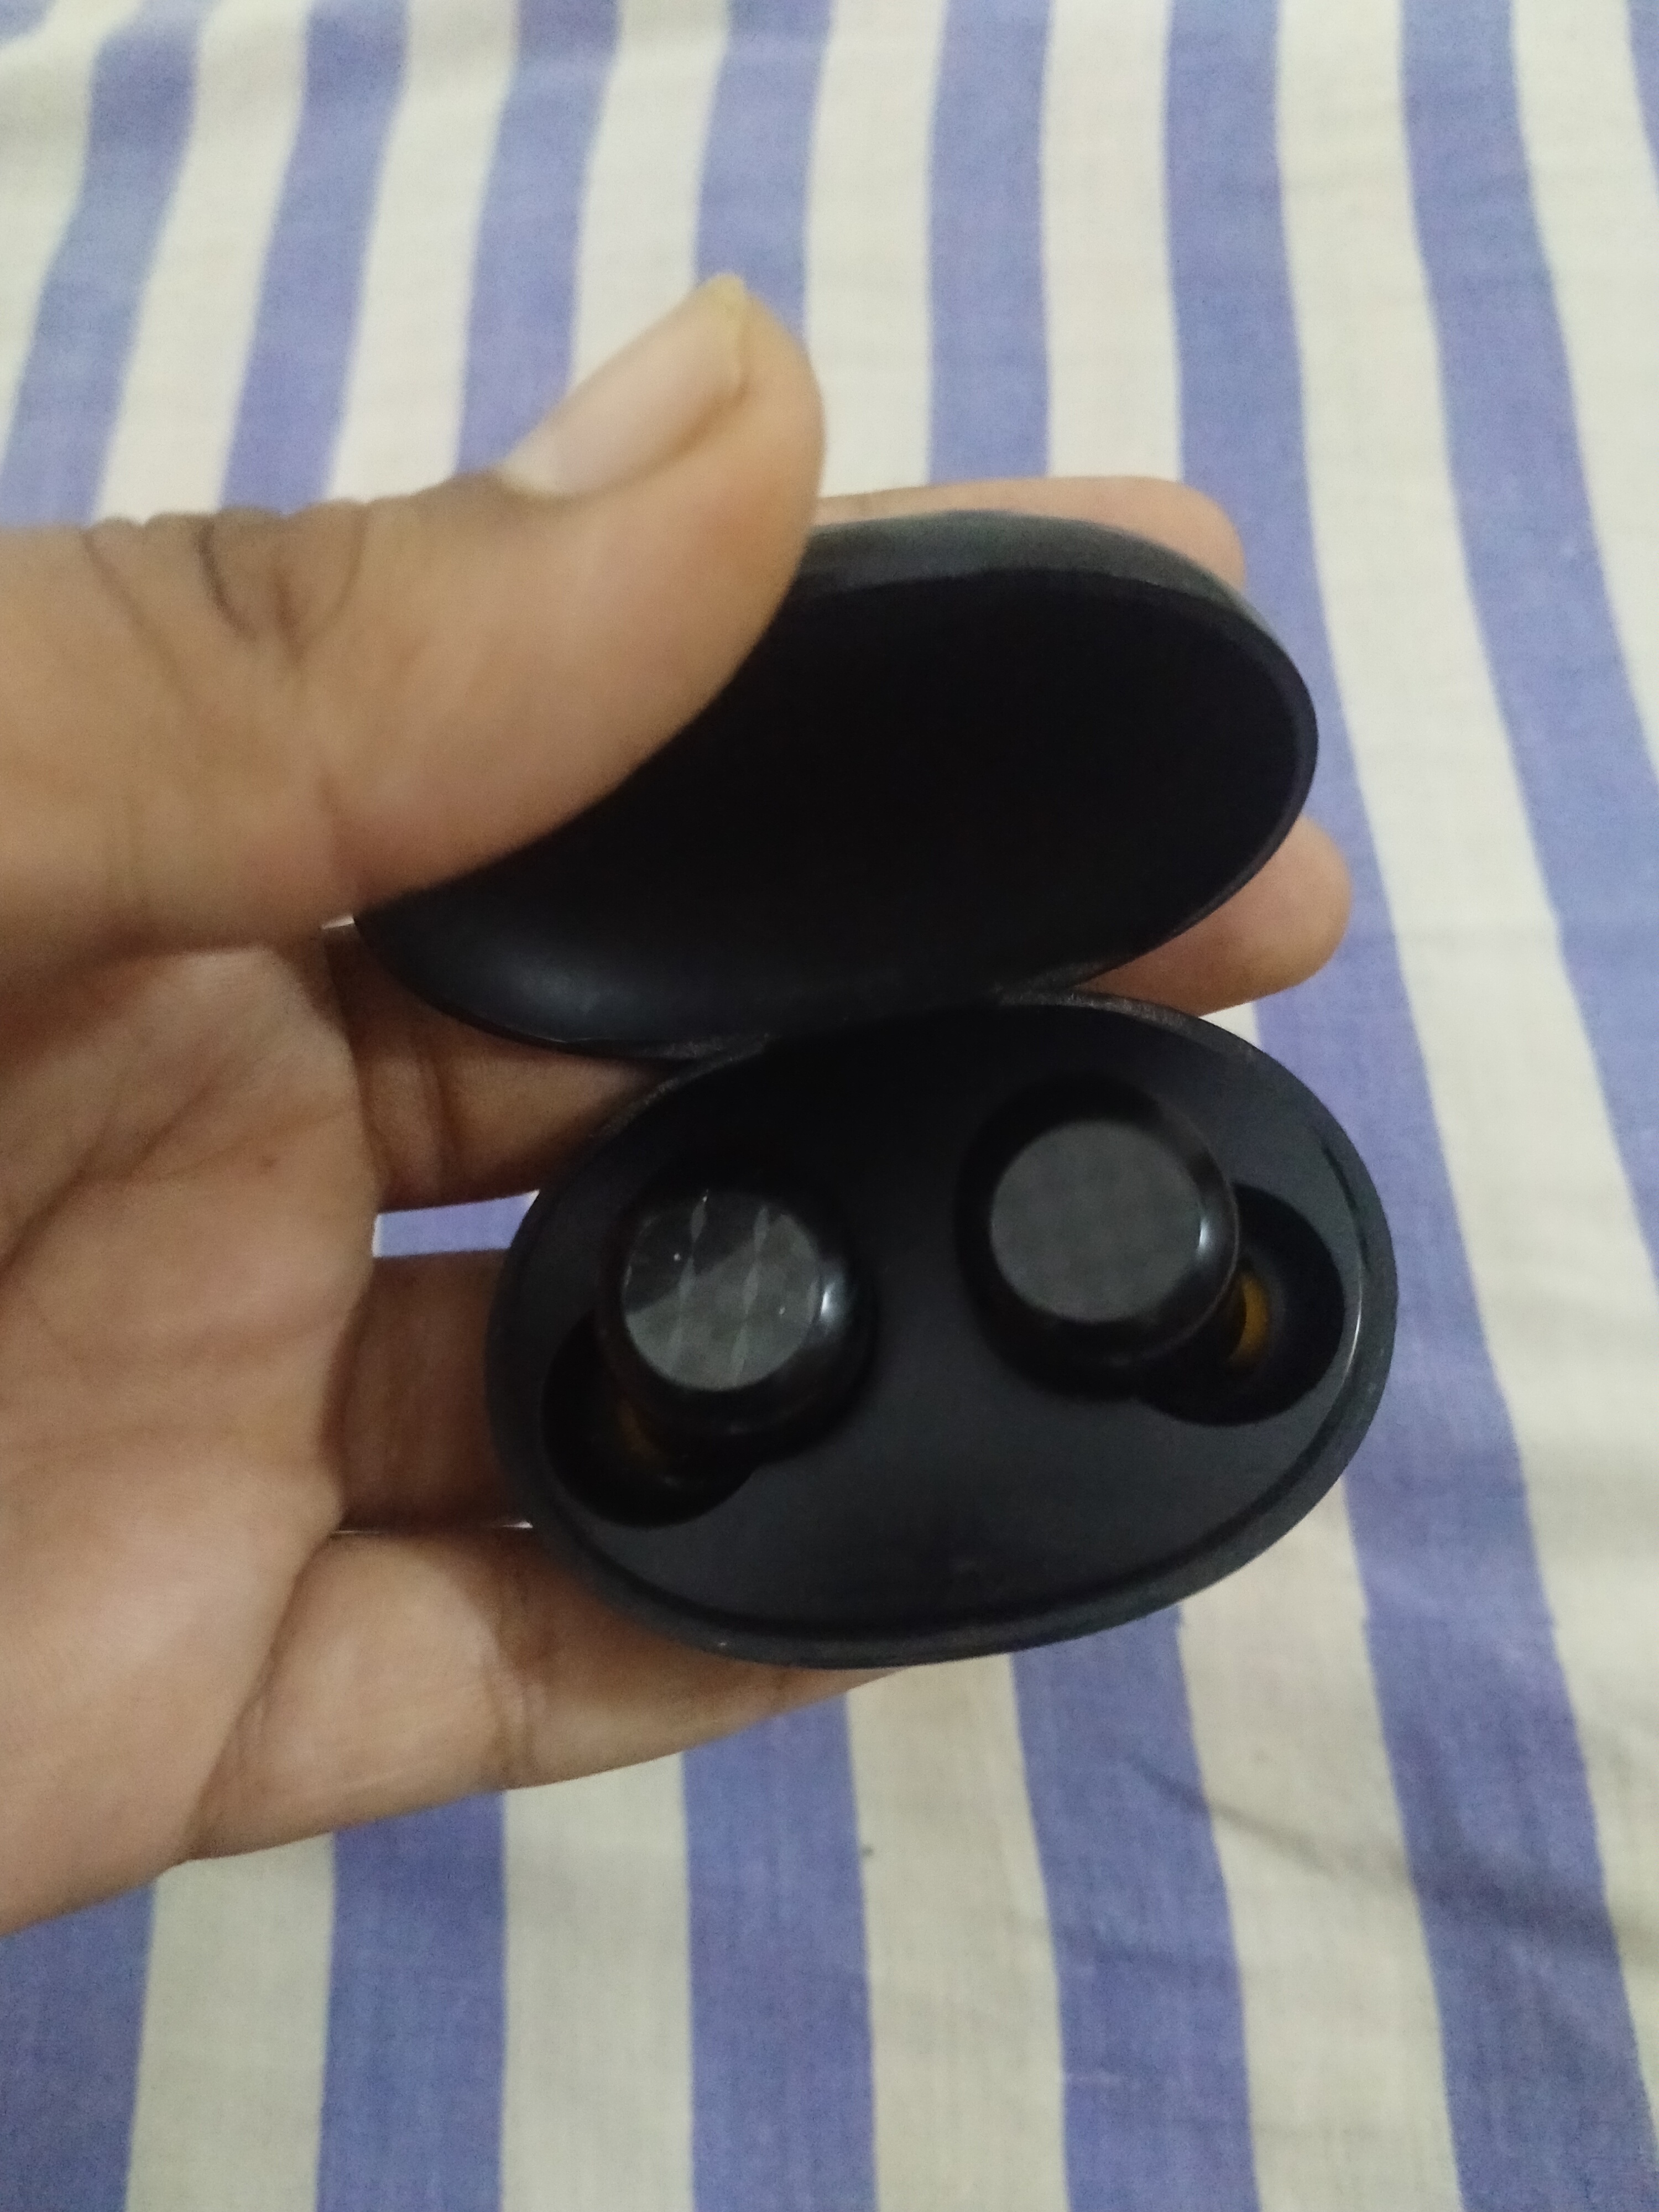 Details View - Realme buds Q2 neo photos - reseller bazzar,realme wireless earbuds,affordable earbuds with great sound,reliable wireless earbuds,long battery life earbuds,advanced drivers for immersive sound,budget earbuds with good condition,realme buds q2 neo review,wireless earbuds for travel and workouts,realme earbuds under 2000,true wireless earbuds with clear sound